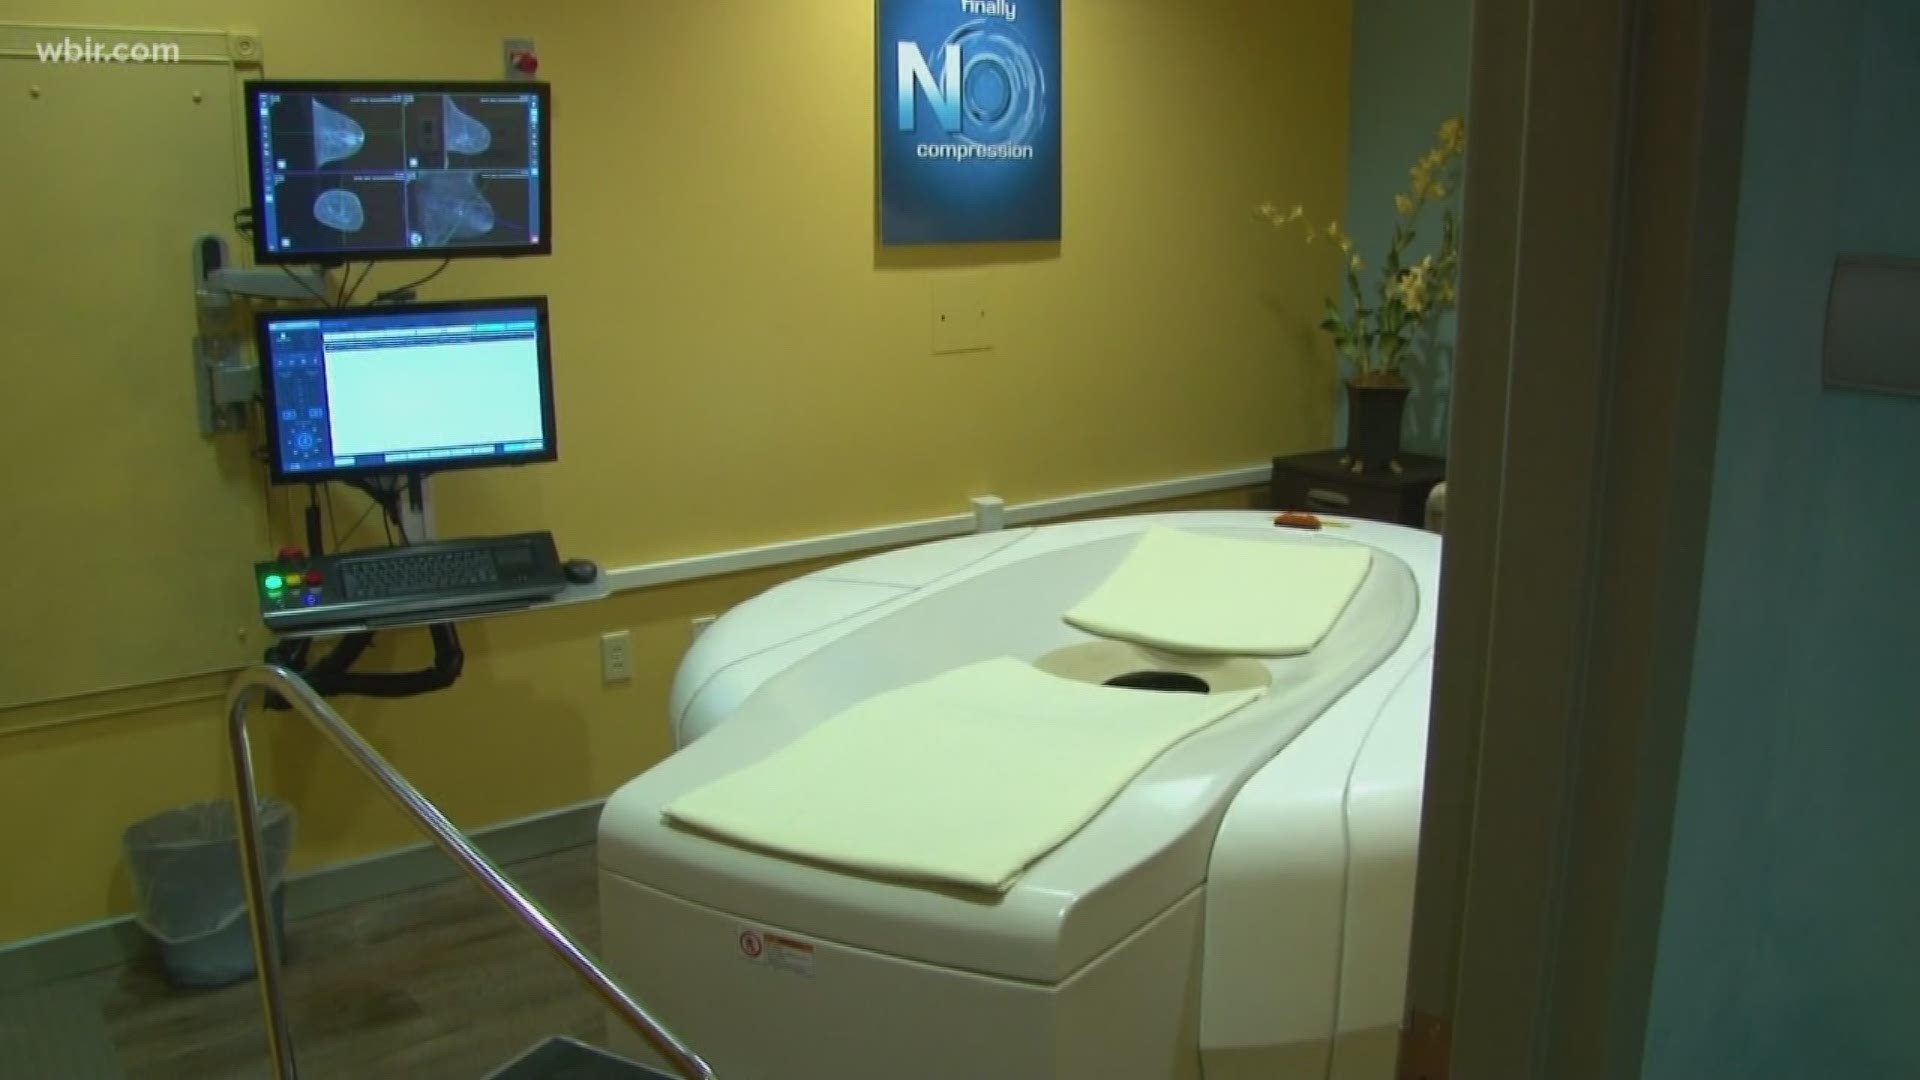 East Tennessee is making history.	The Knoxville Comprehensive Breast Center opened the first "no compression" breast imaging unit in the country today.